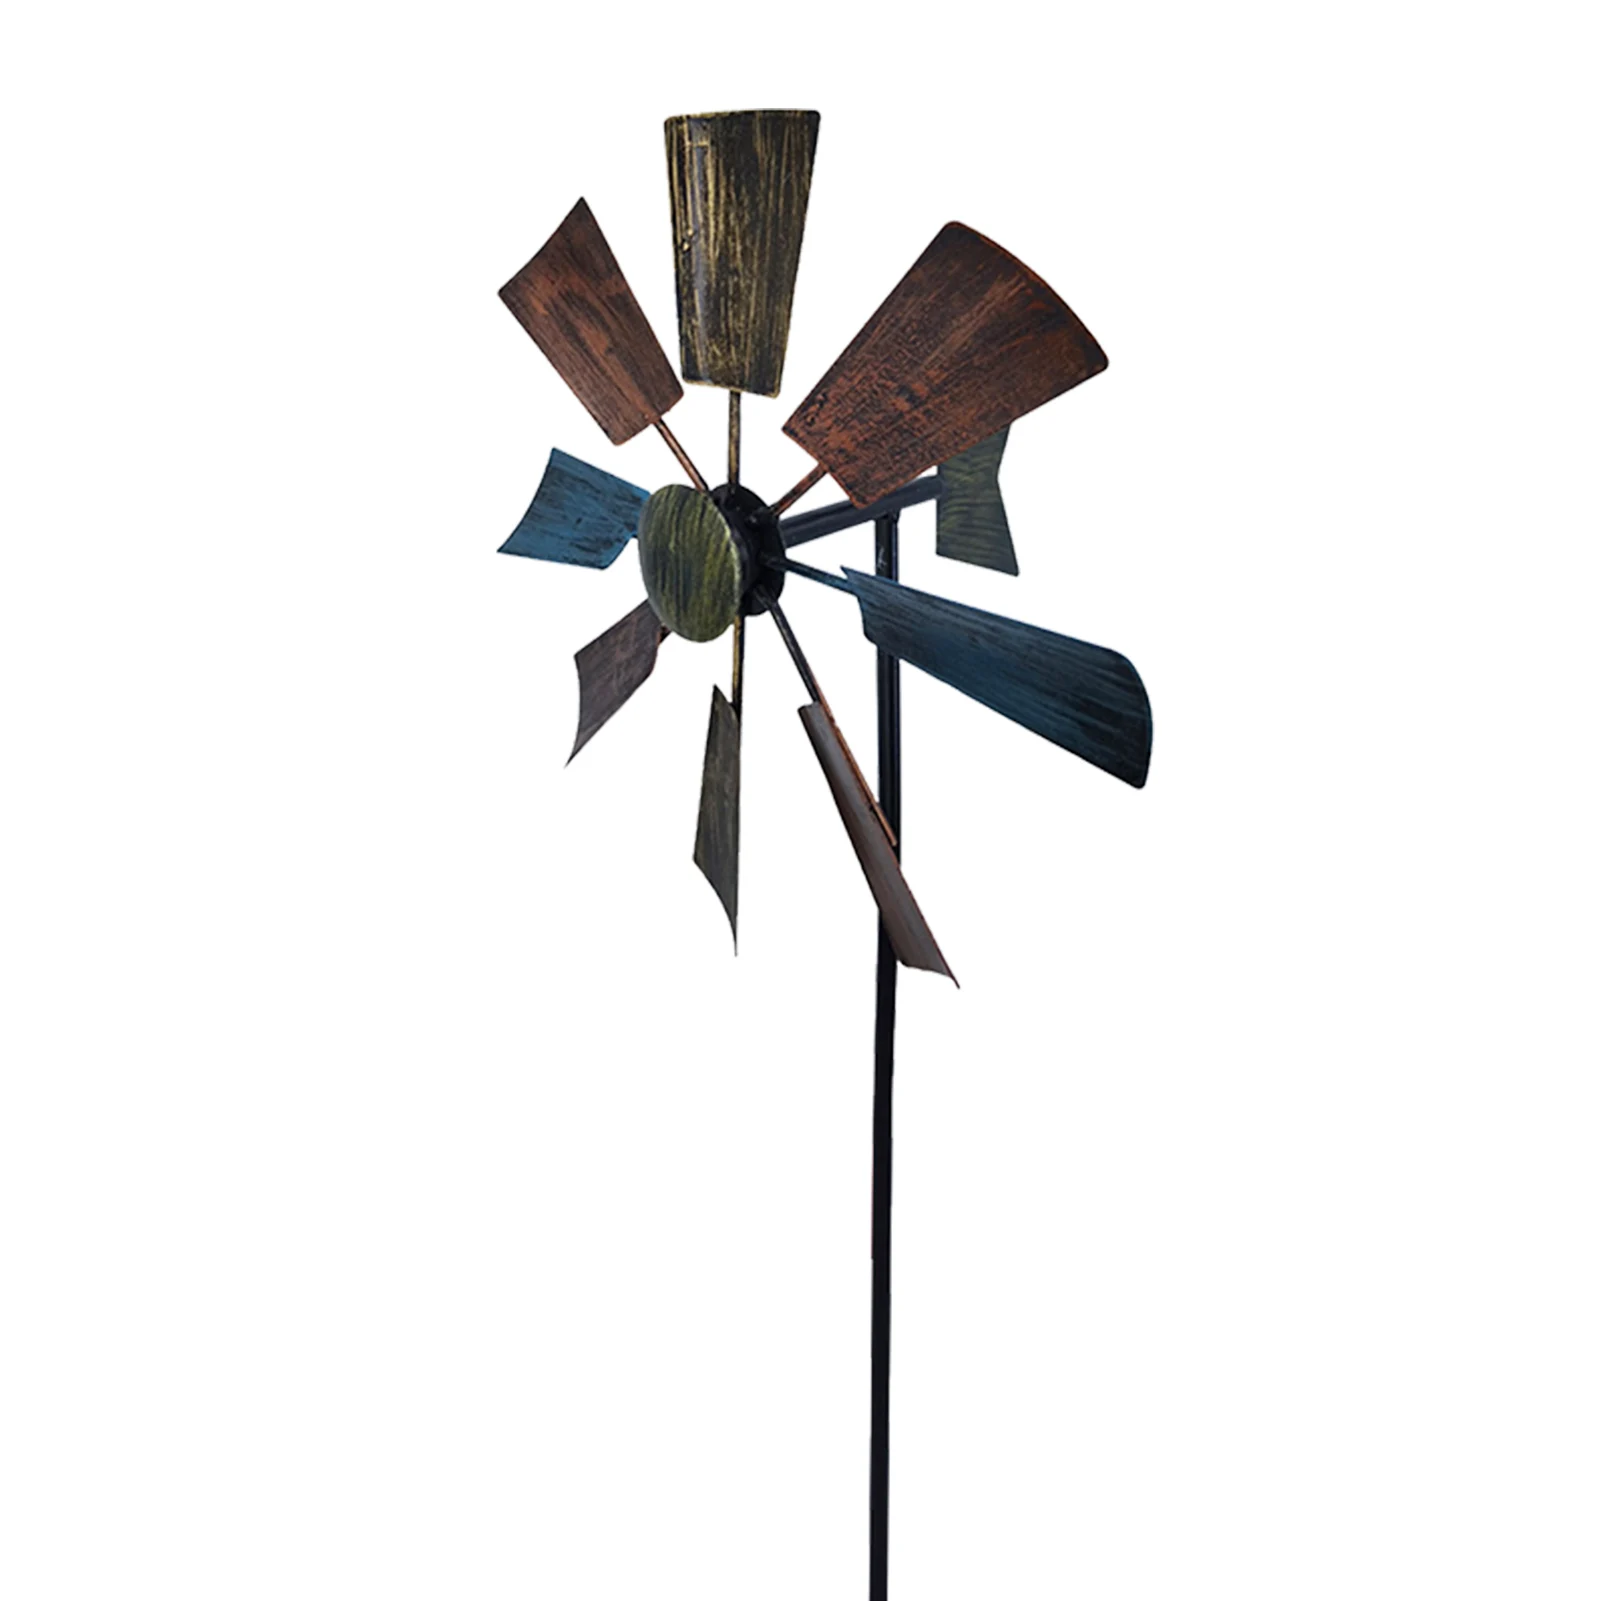 

Backyard Outdoor Decor Whirligig Lawn Patio DIY Tool Ornament Metal Wind Spinner With Stake Garden Windmill Durable Gift